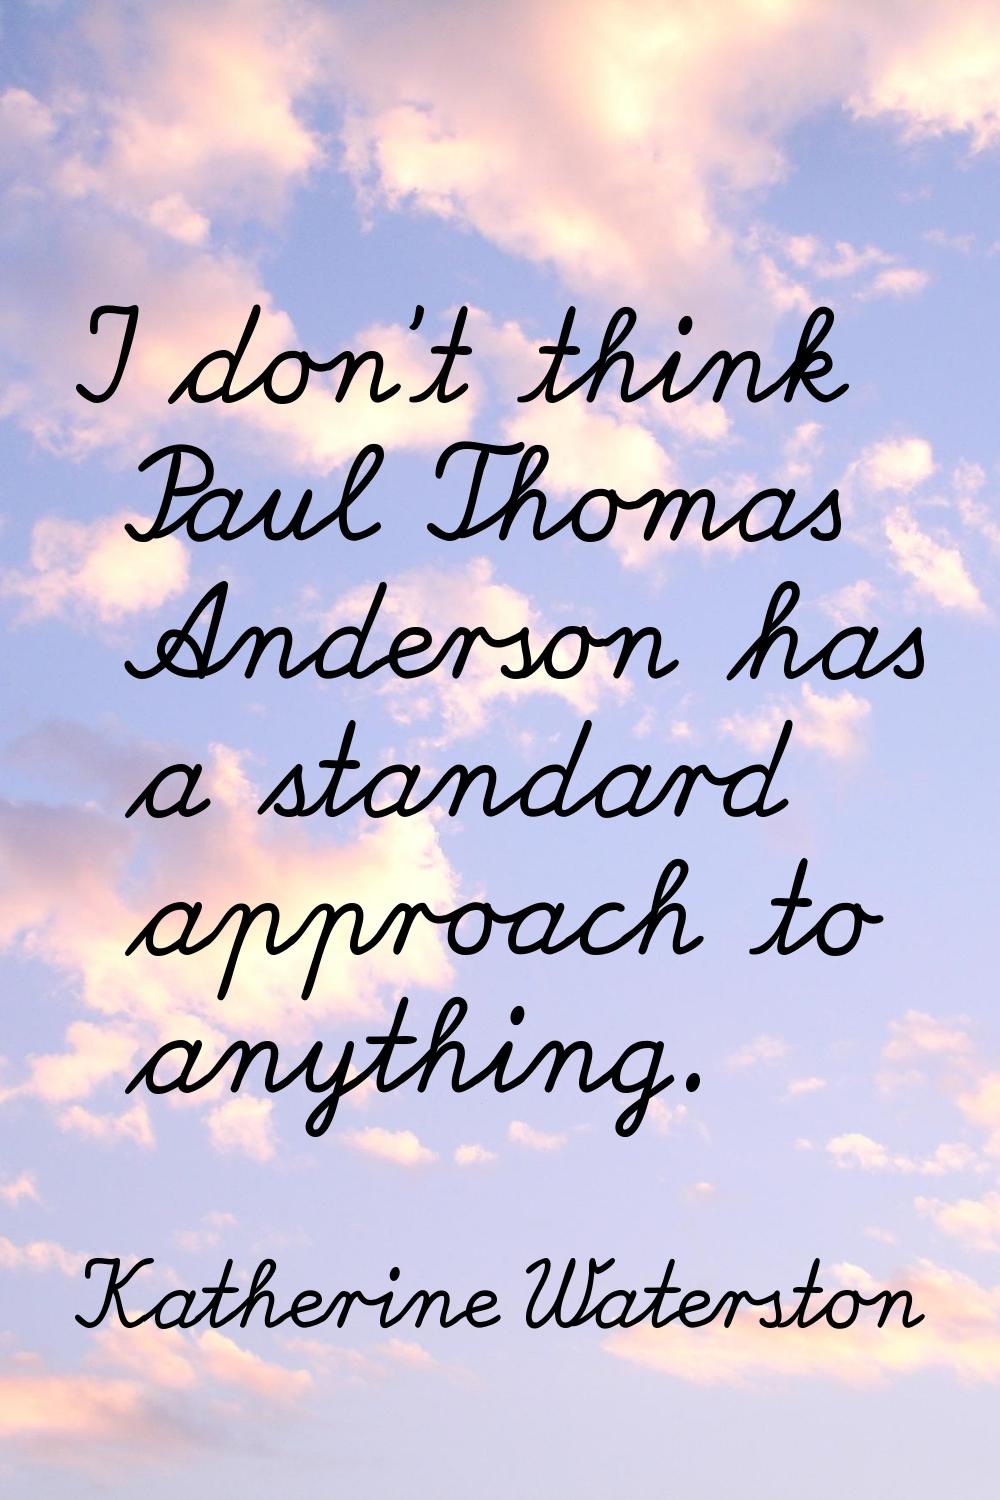 I don't think Paul Thomas Anderson has a standard approach to anything.